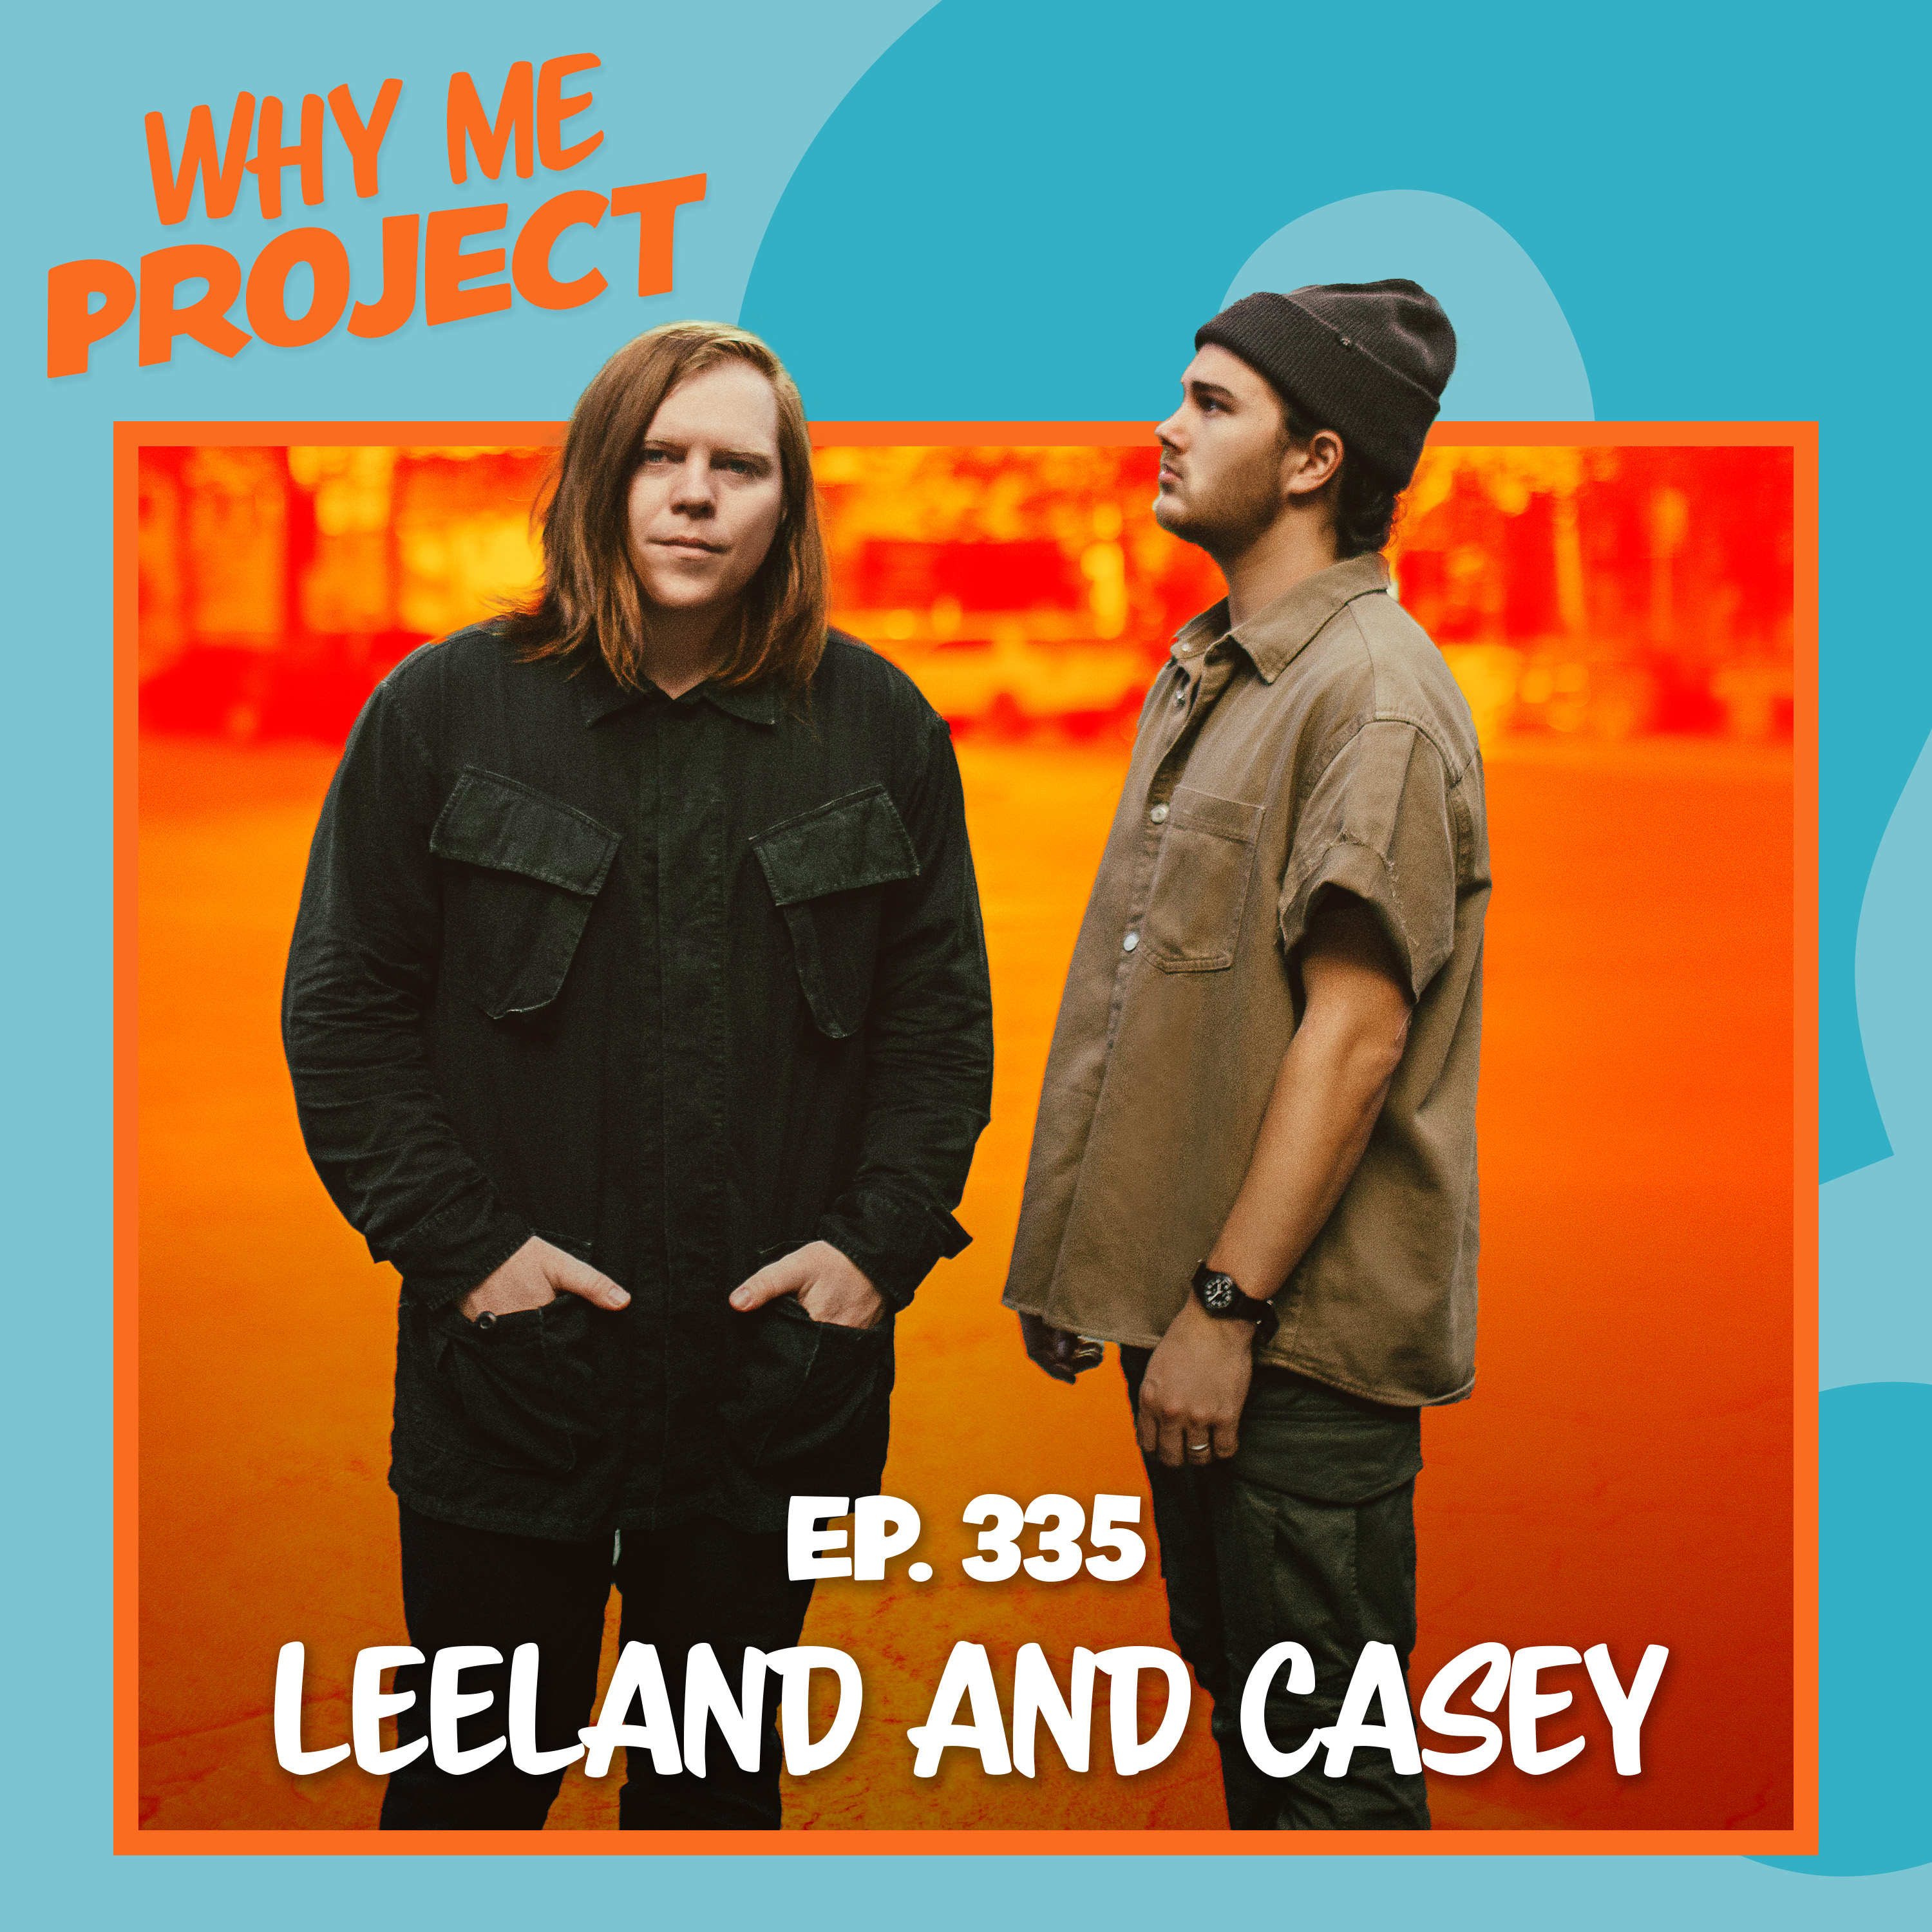 Leeland and Casey